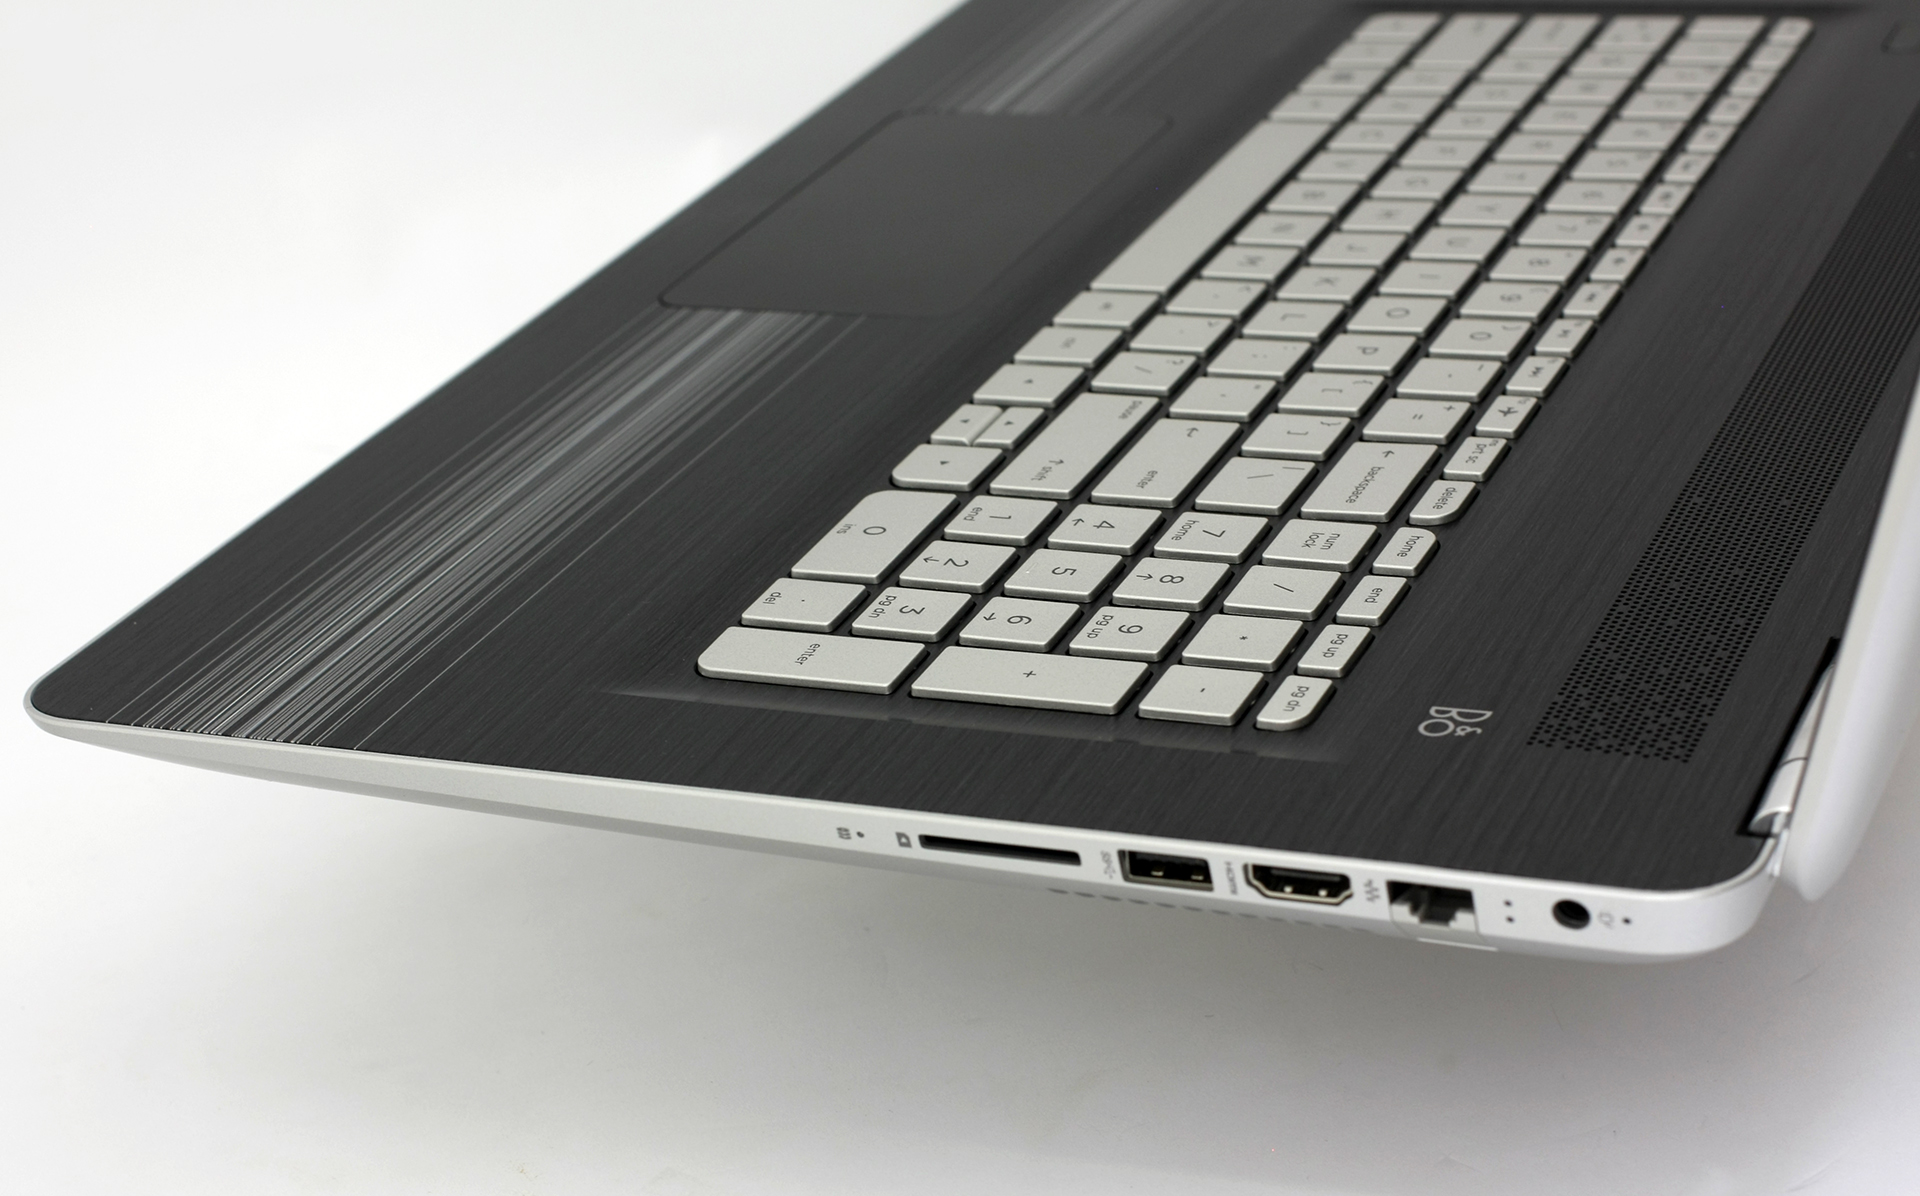 HP Pavilion 17 (2016) review - affordable, powerful, distant from